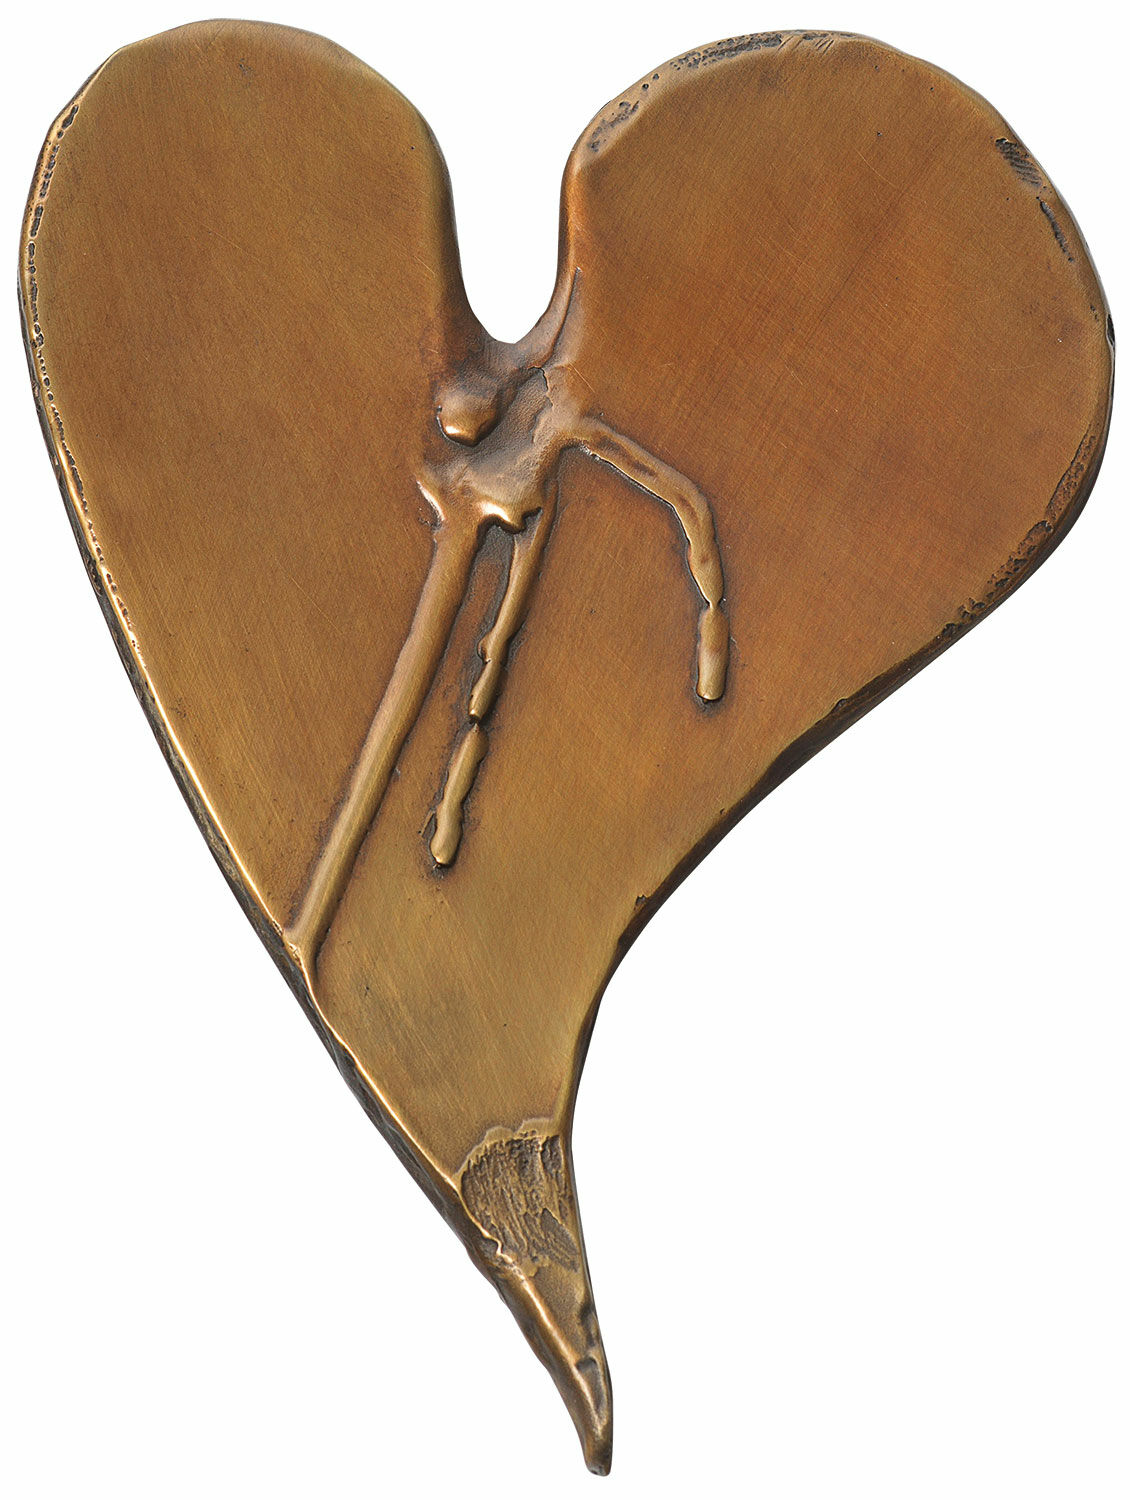 Bronze object "Heart with Tears" by Bruno Bruni